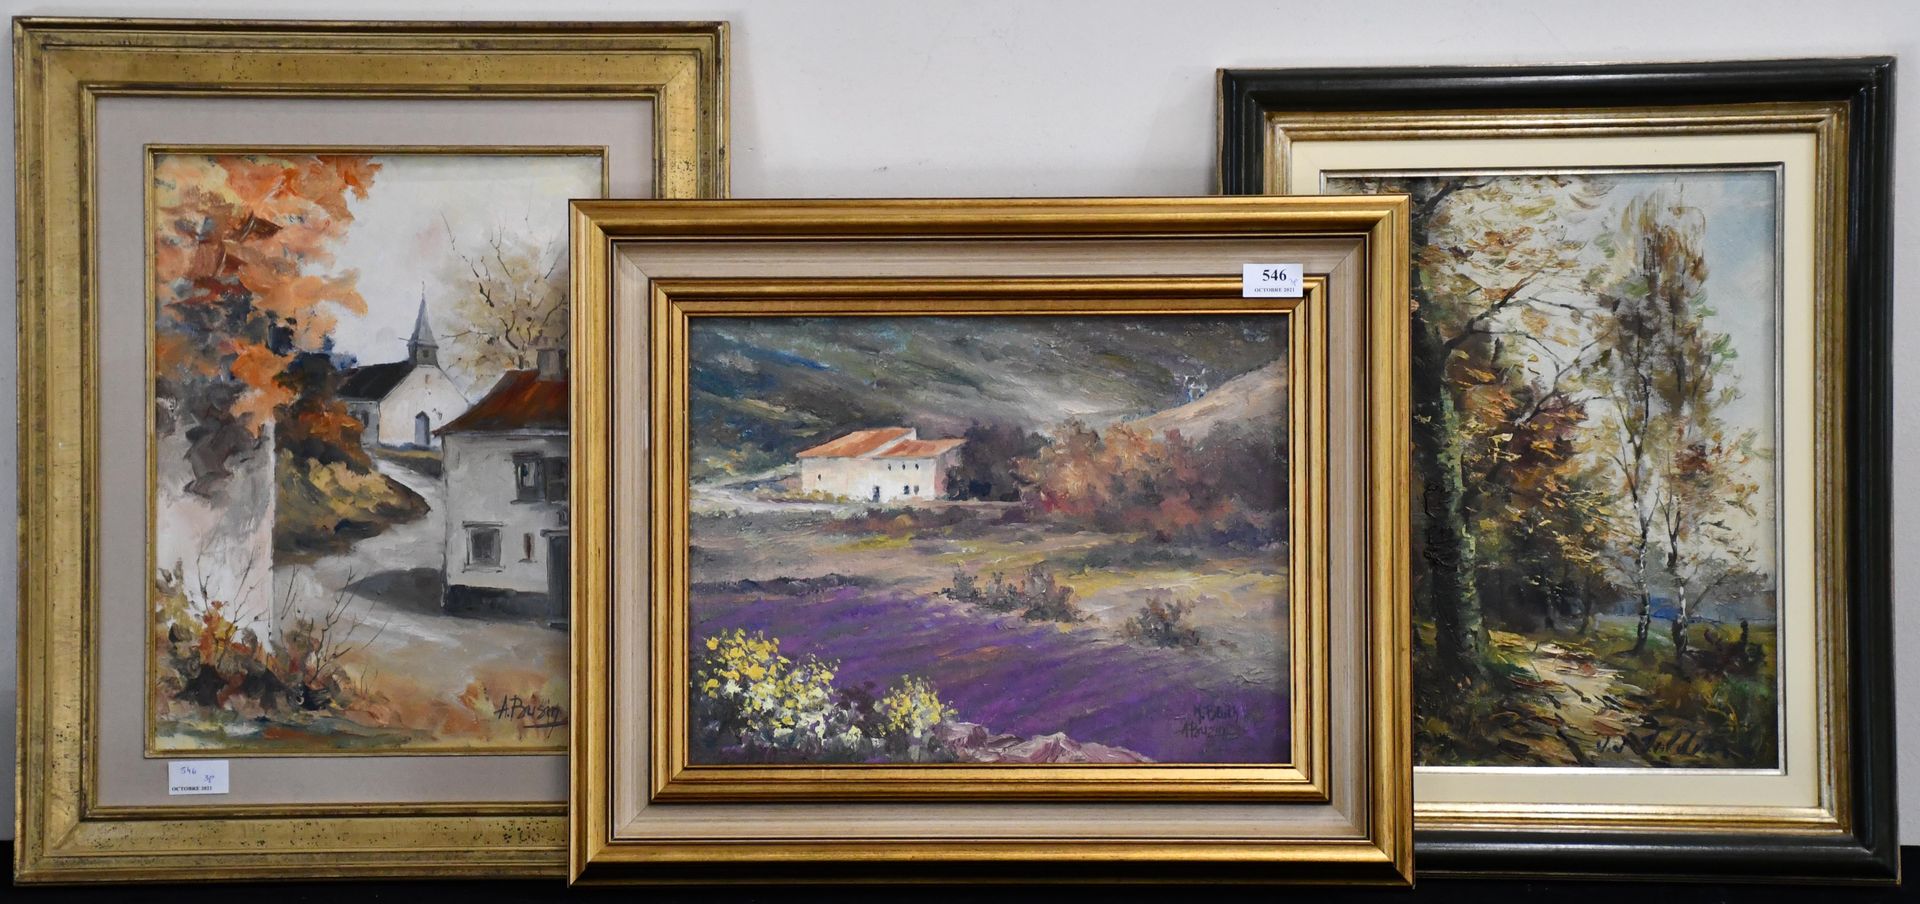 Null Three paintings

Two oils on canvas : "Landscapes" by A. Busin, and, oil on&hellip;